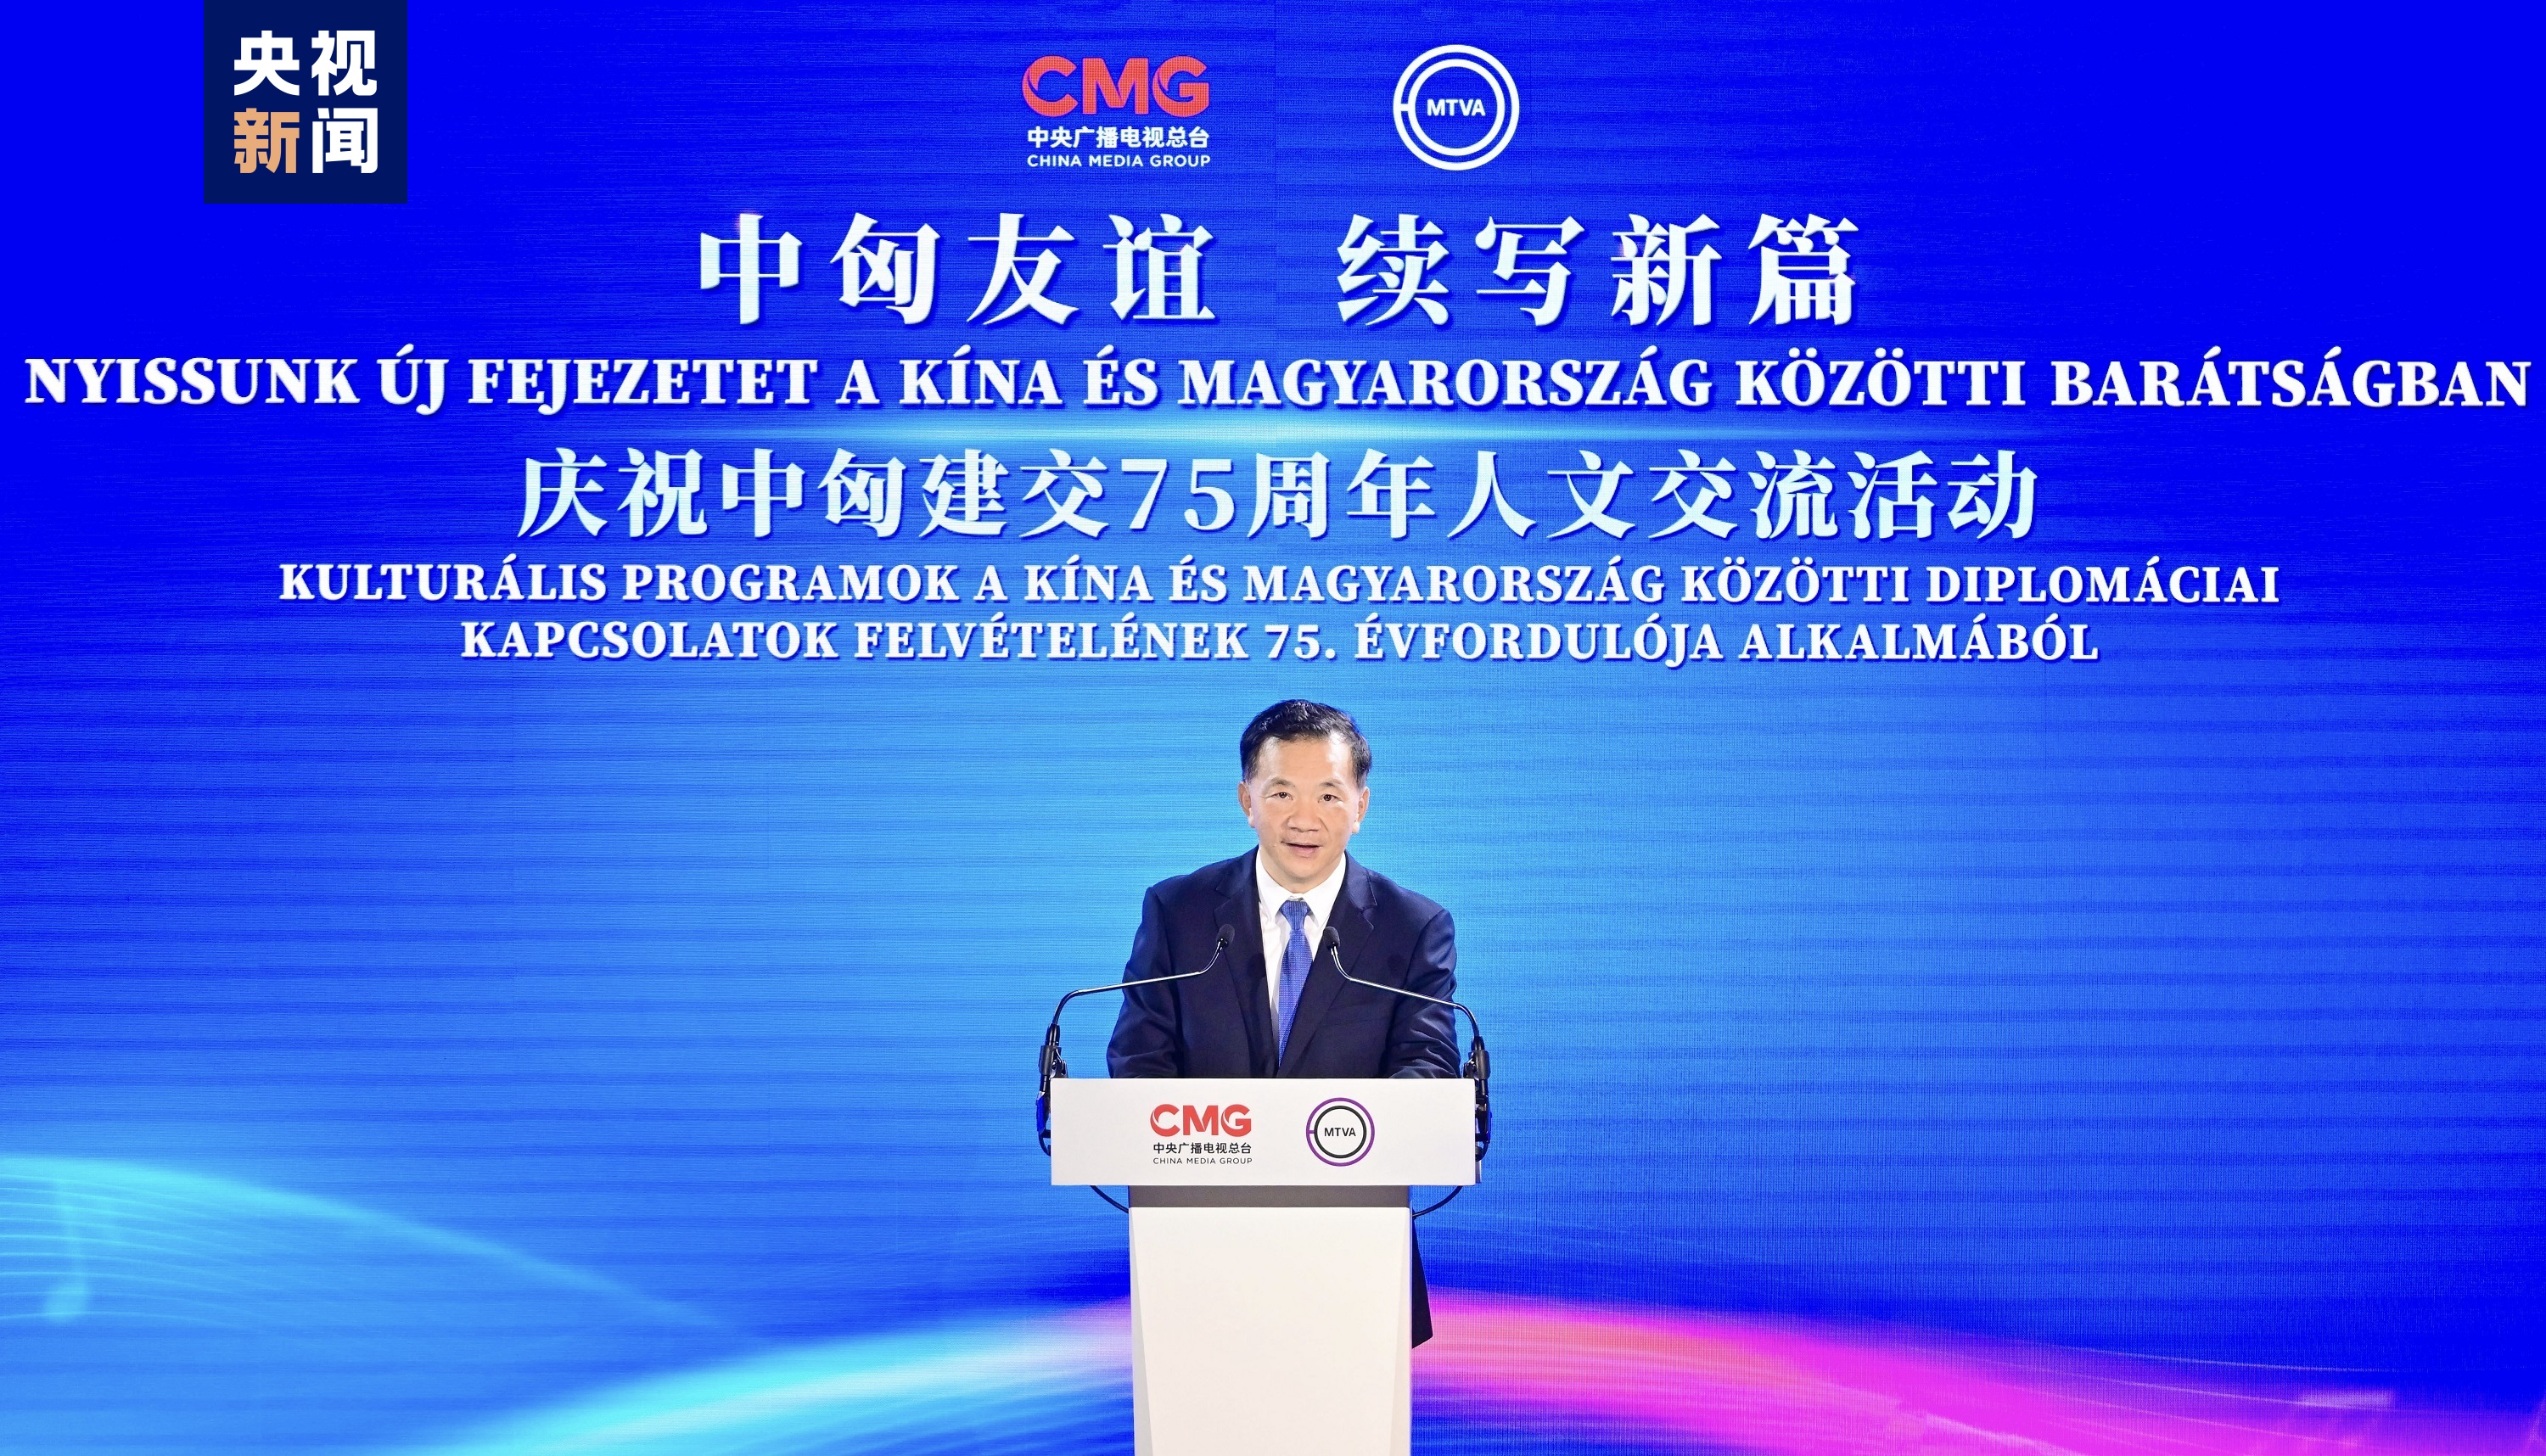 Shen Haixiong, vice minister of the Publicity Department of the Communist Party of China Central Committee and president of CMG, speaks at the opening ceremony of CMG's show 